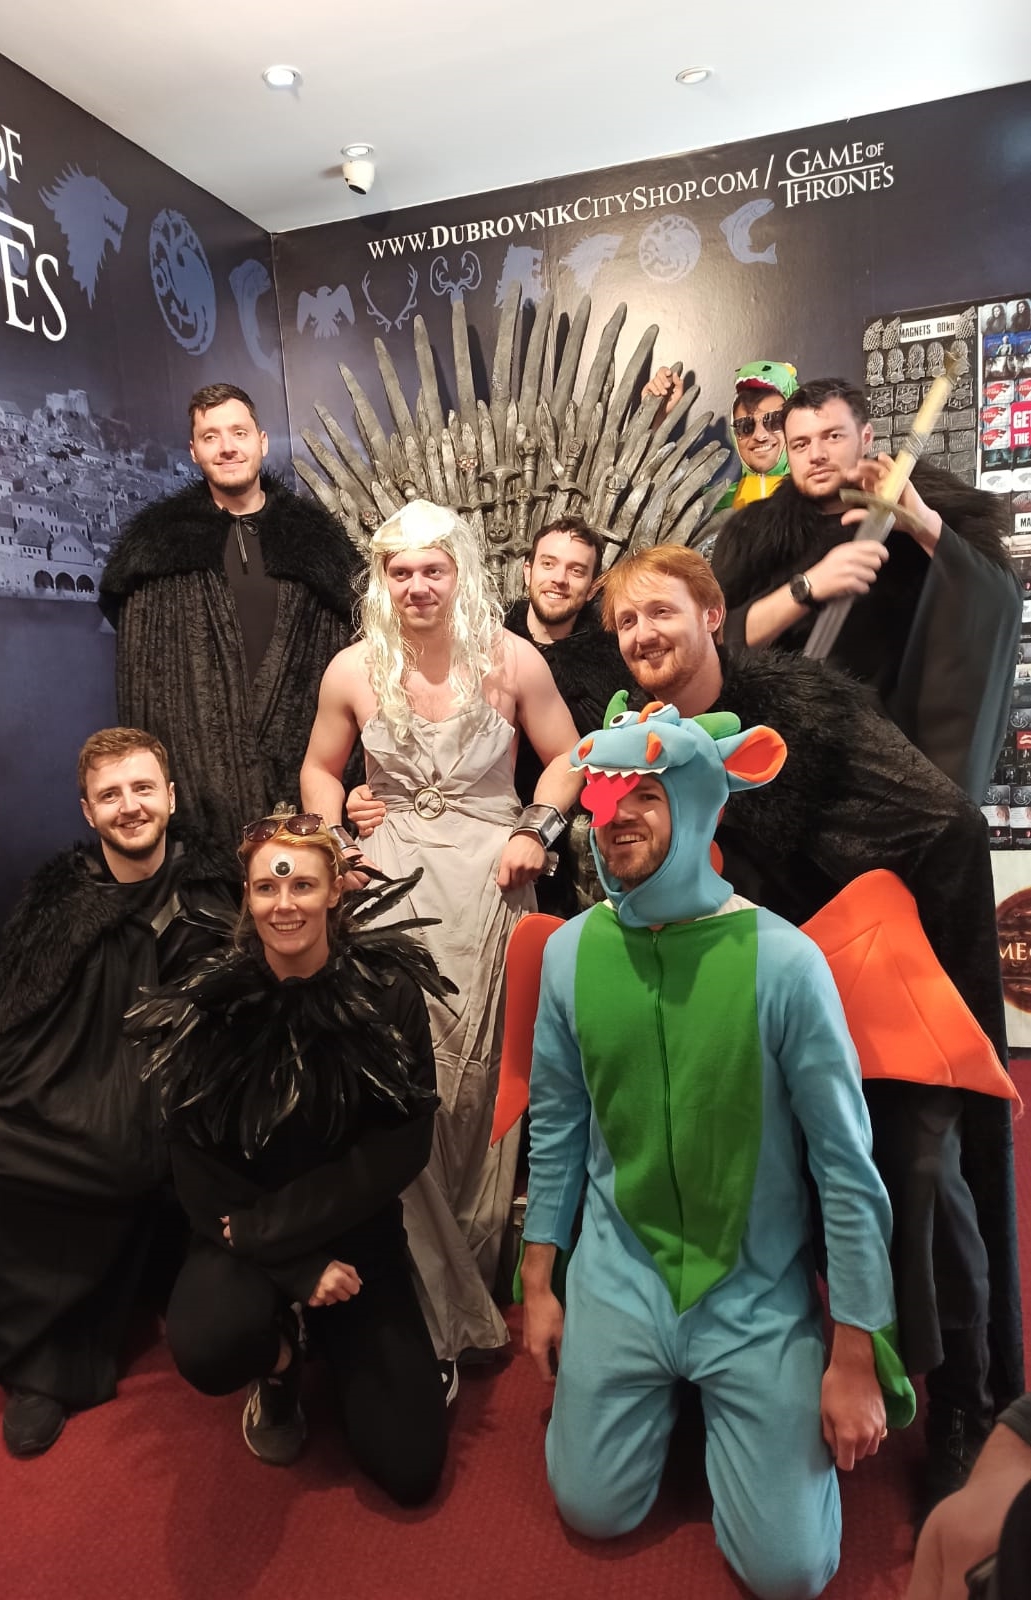 Game Of Thrones Dubrovnik-Bachelor Party